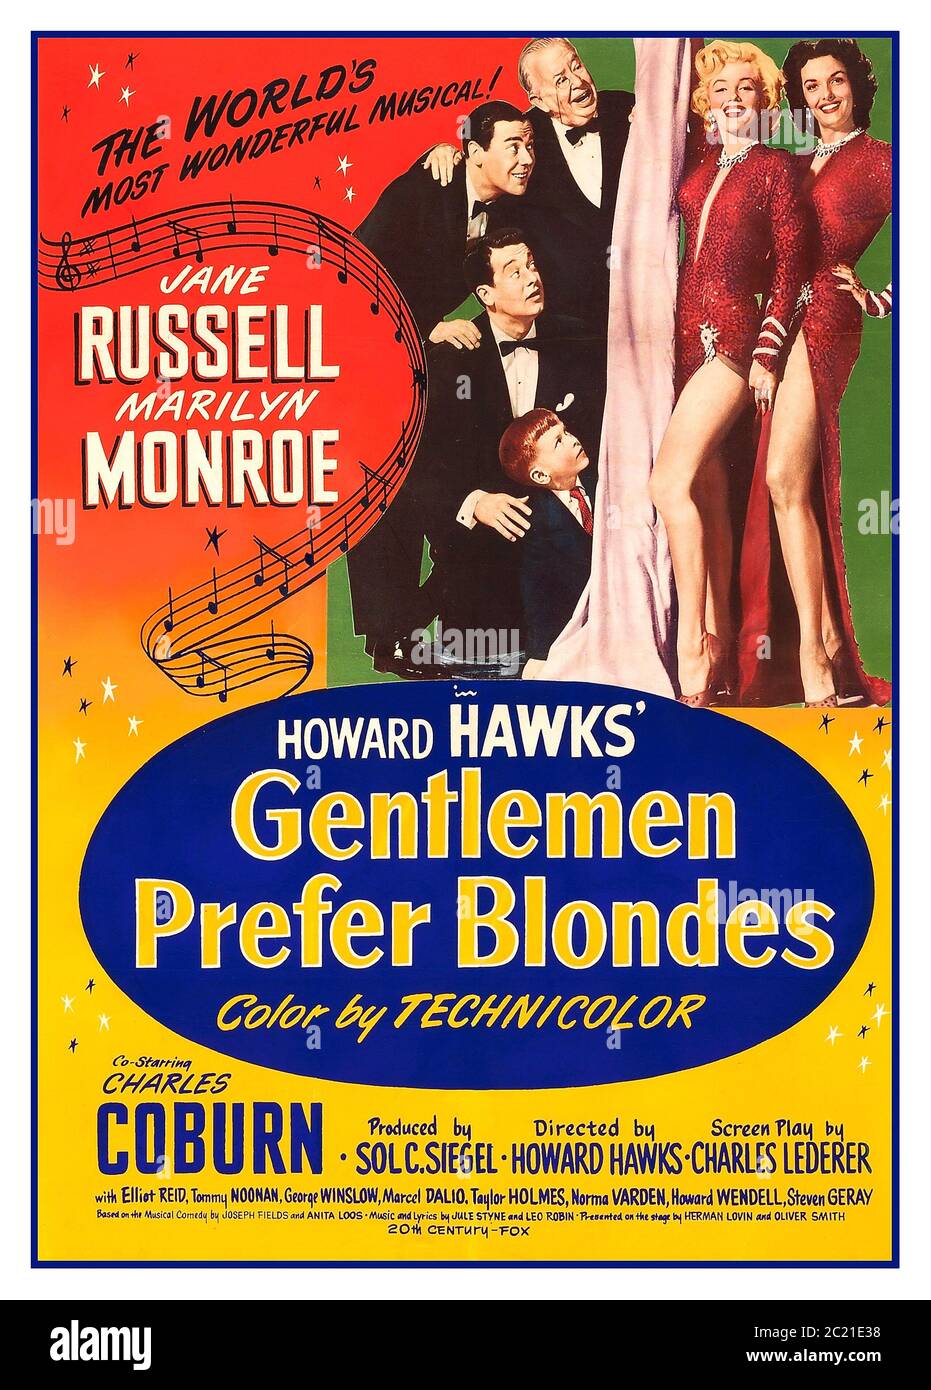 Archive Movie Poster 'Gentlemen Prefer Blondes' (20th Century Fox, 1953) Jane Russell and Marilyn Monroe, wind their way across the Atlantic to Paris on an elegant ocean liner, all the while searching for rich husbands. Under the direction of Howard Hawks (and  help from substitute singer Marni Nixon), Marilyn has one of her best-known screen moments with her rendition of 'Diamonds Are a Girl's Best Friend'. Starring Jane Russell and Marilyn Monroe, Charles Coburn, Elliott Reid,Tommy Noonan,George Winslow ,Marcel Dalio,Taylor Holmes Norma Varden Howard Wendell, Steven Geray Stock Photo